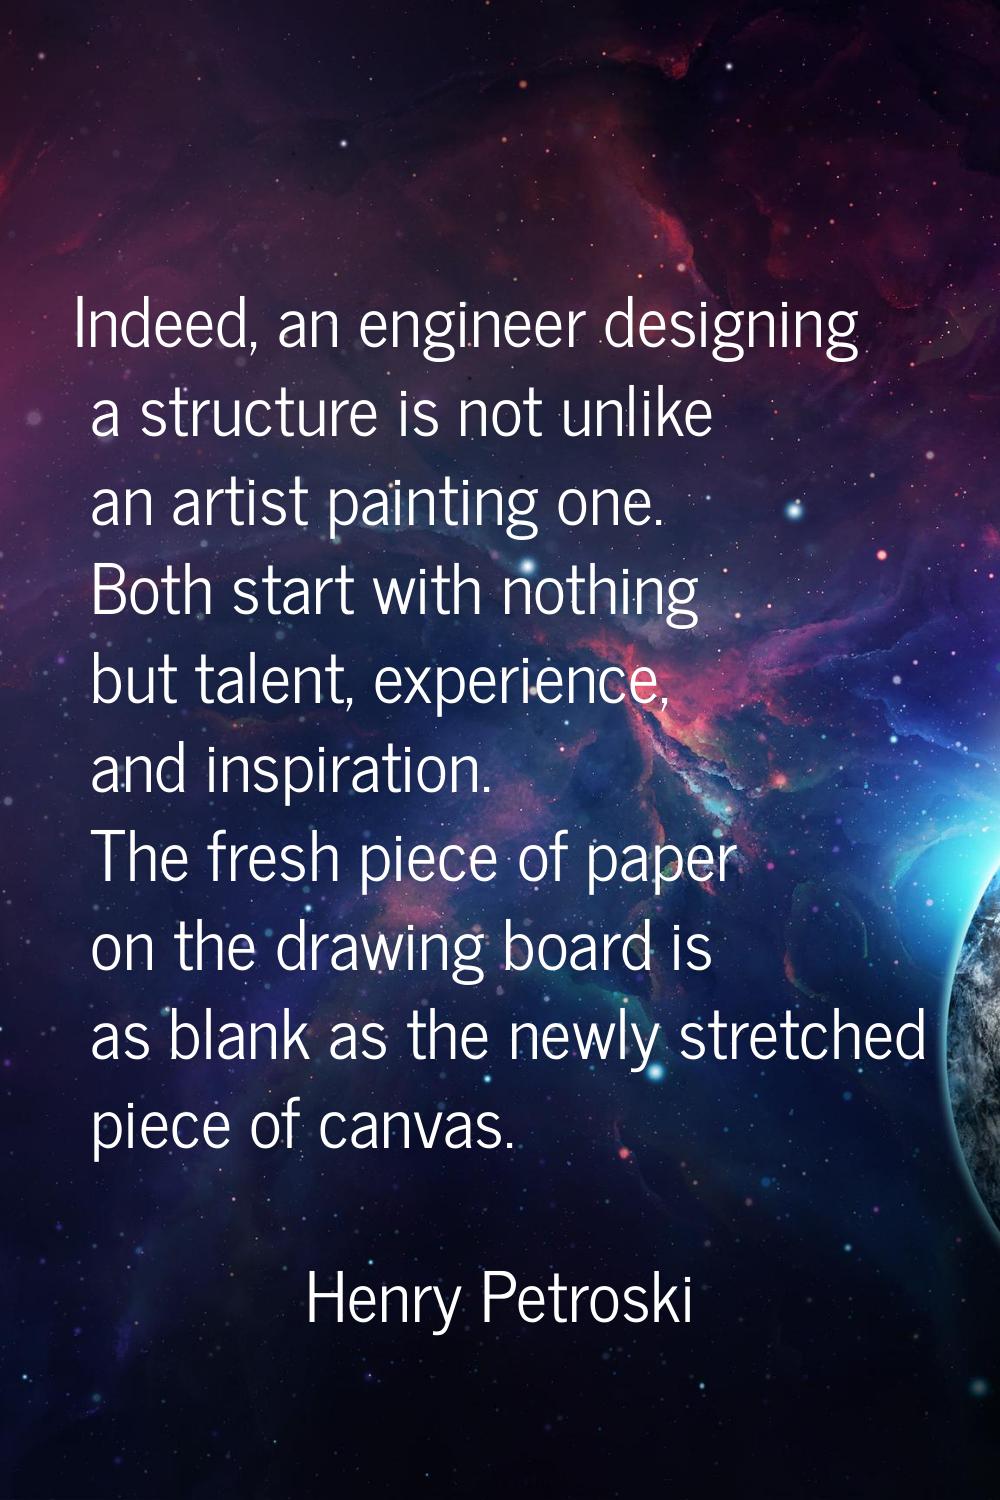 Indeed, an engineer designing a structure is not unlike an artist painting one. Both start with not